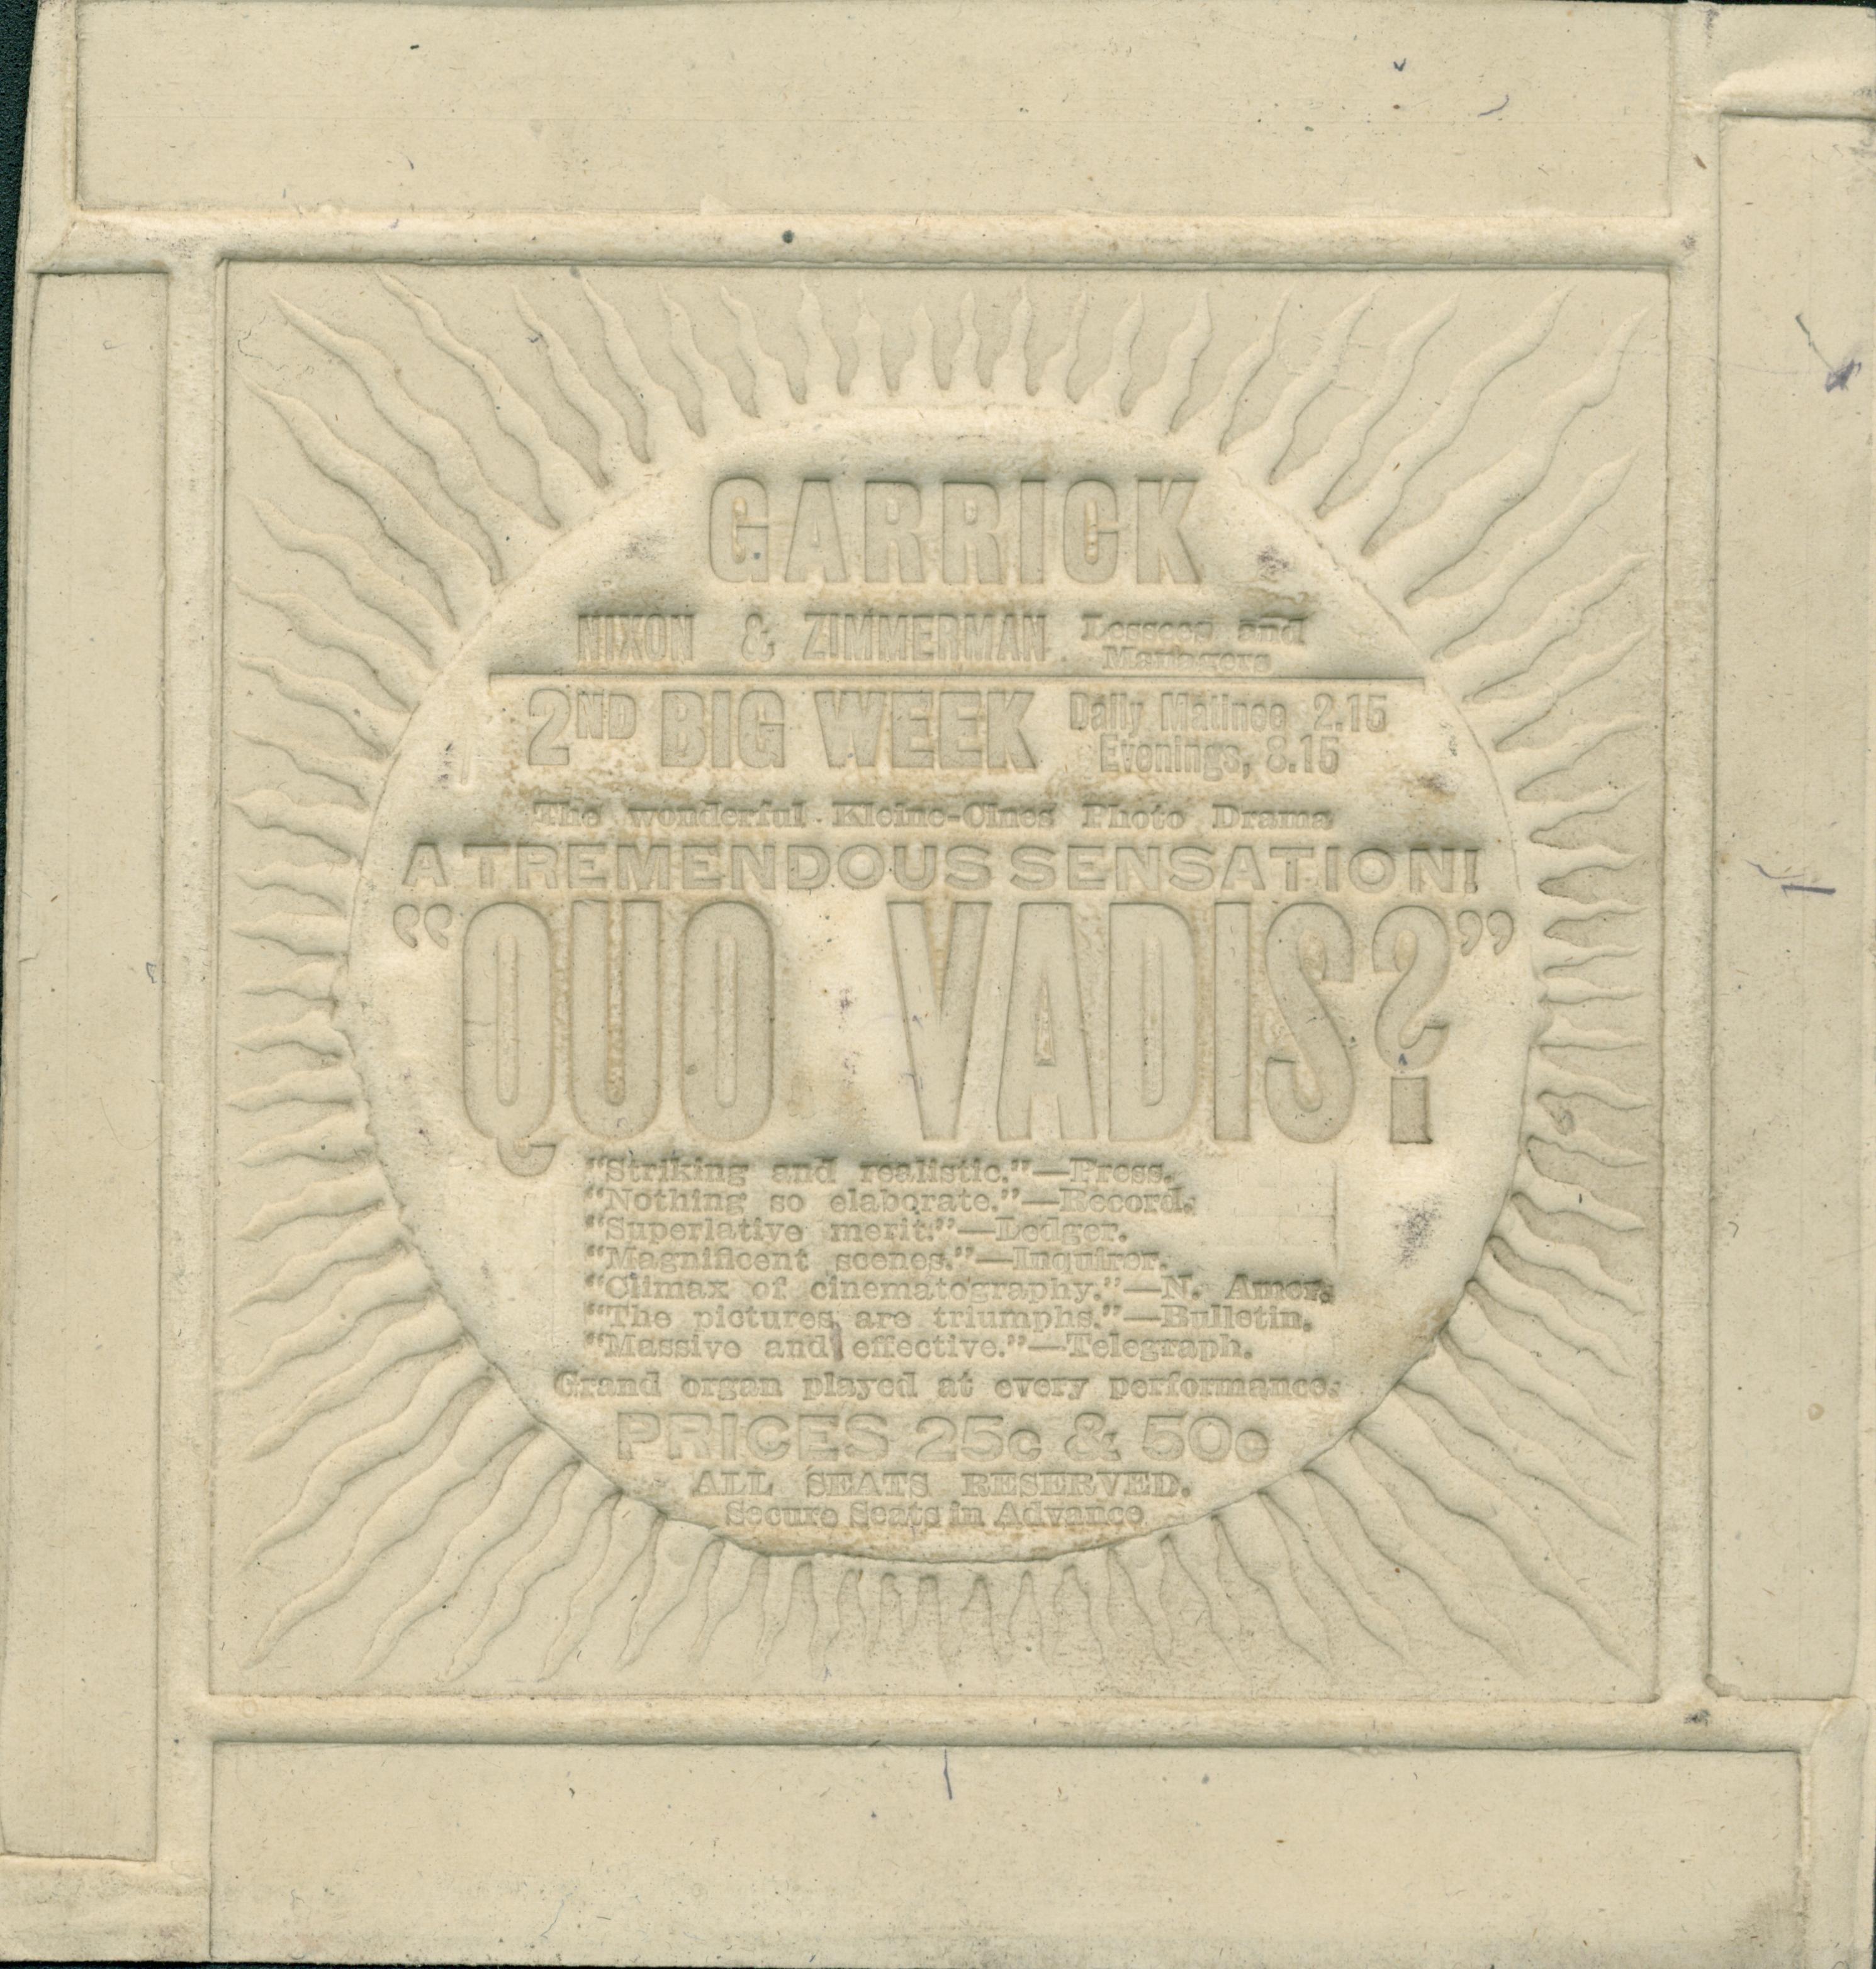 This embossed advertisement contains information about the production.